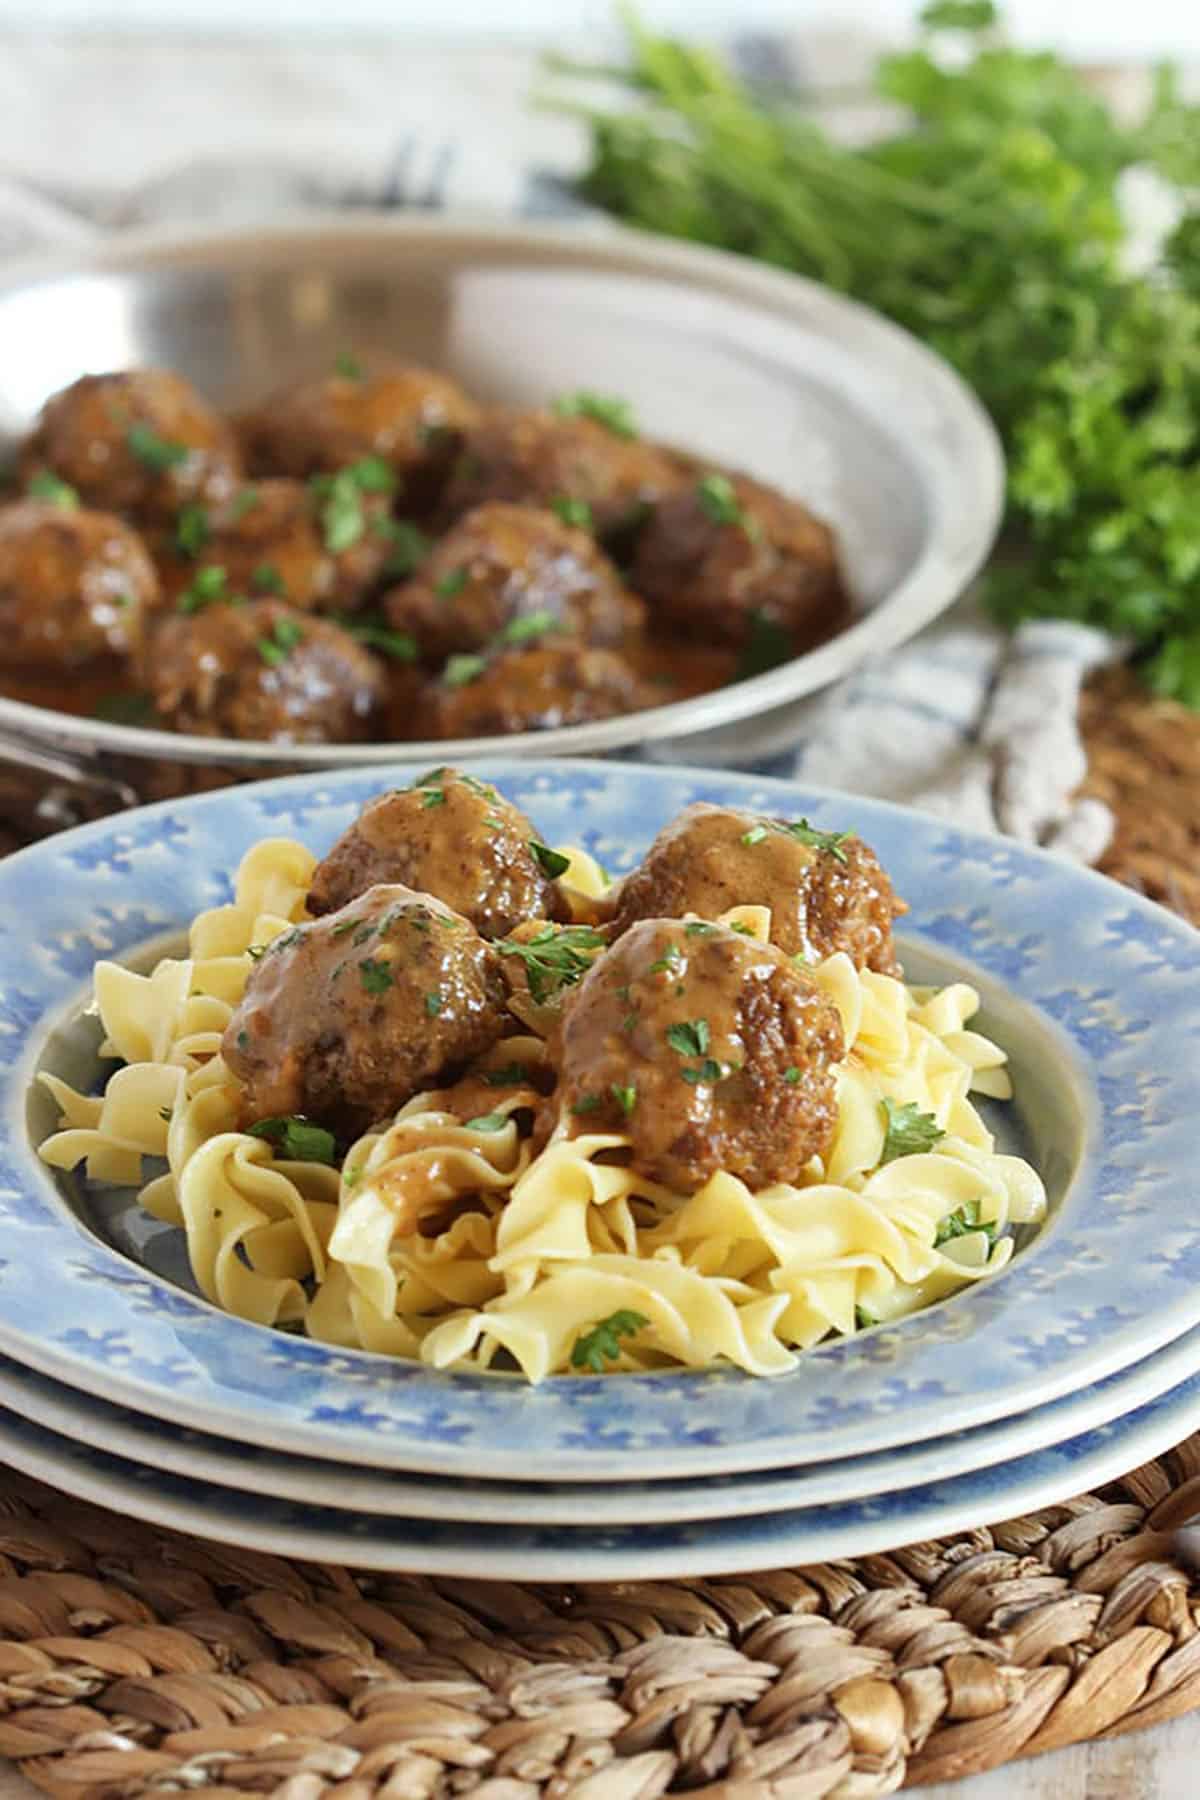 Swedish Meatballs on egg noodles plated on a blue plate with a skillet full of meatballs in the background.